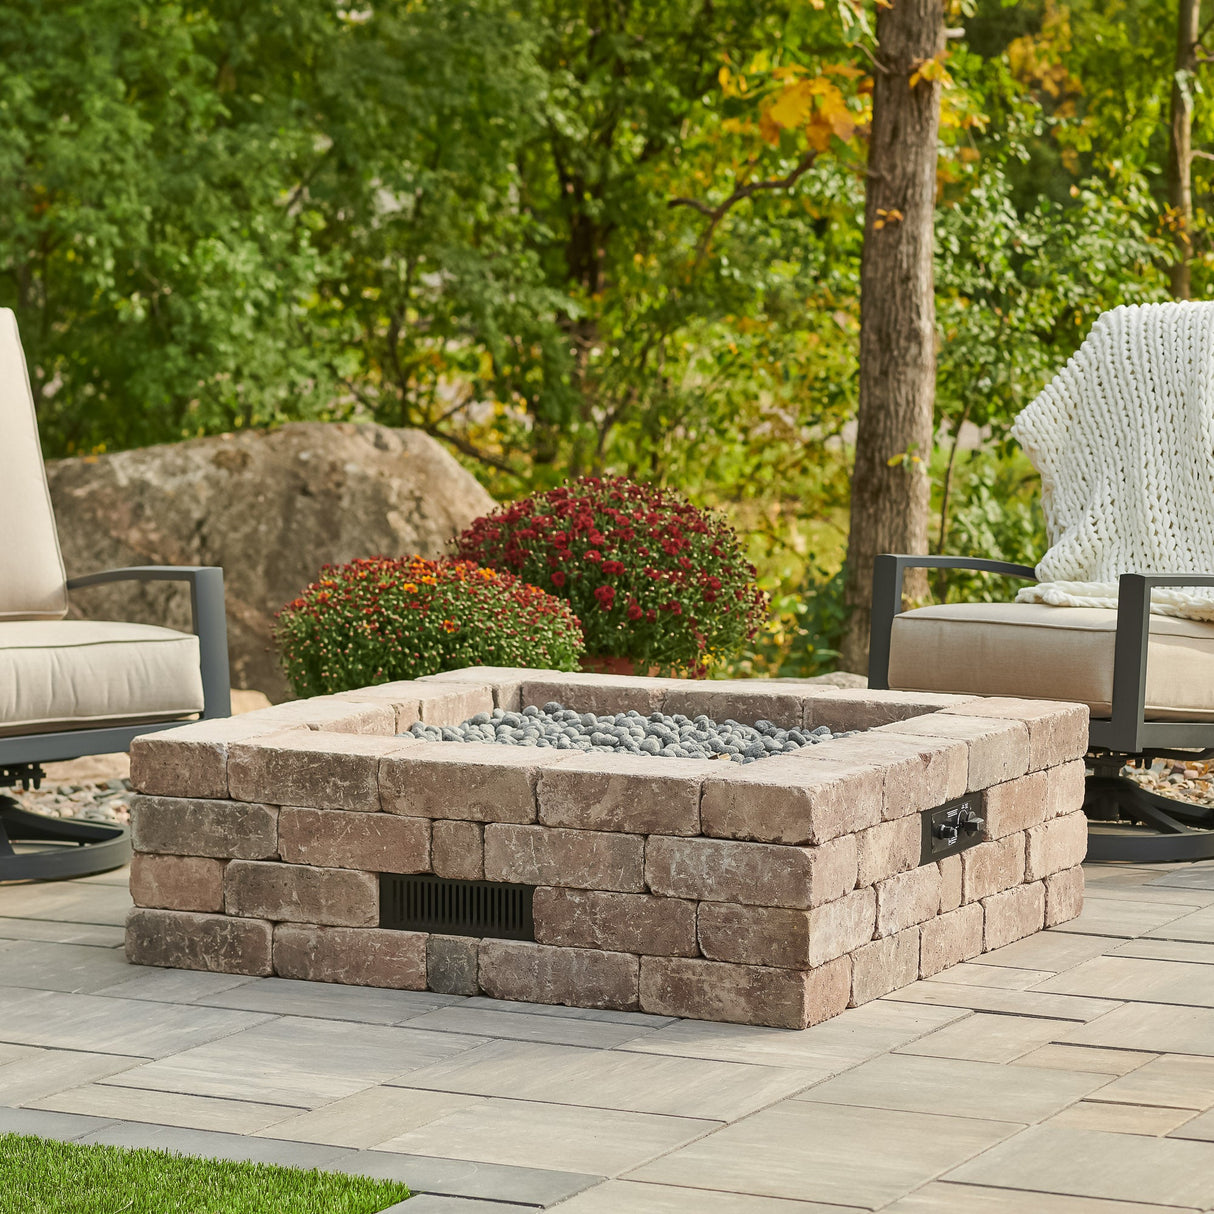 The Bronson Block Square Gas Fire Pit Kit with lava rocks on the burner sitting in an outdoor space